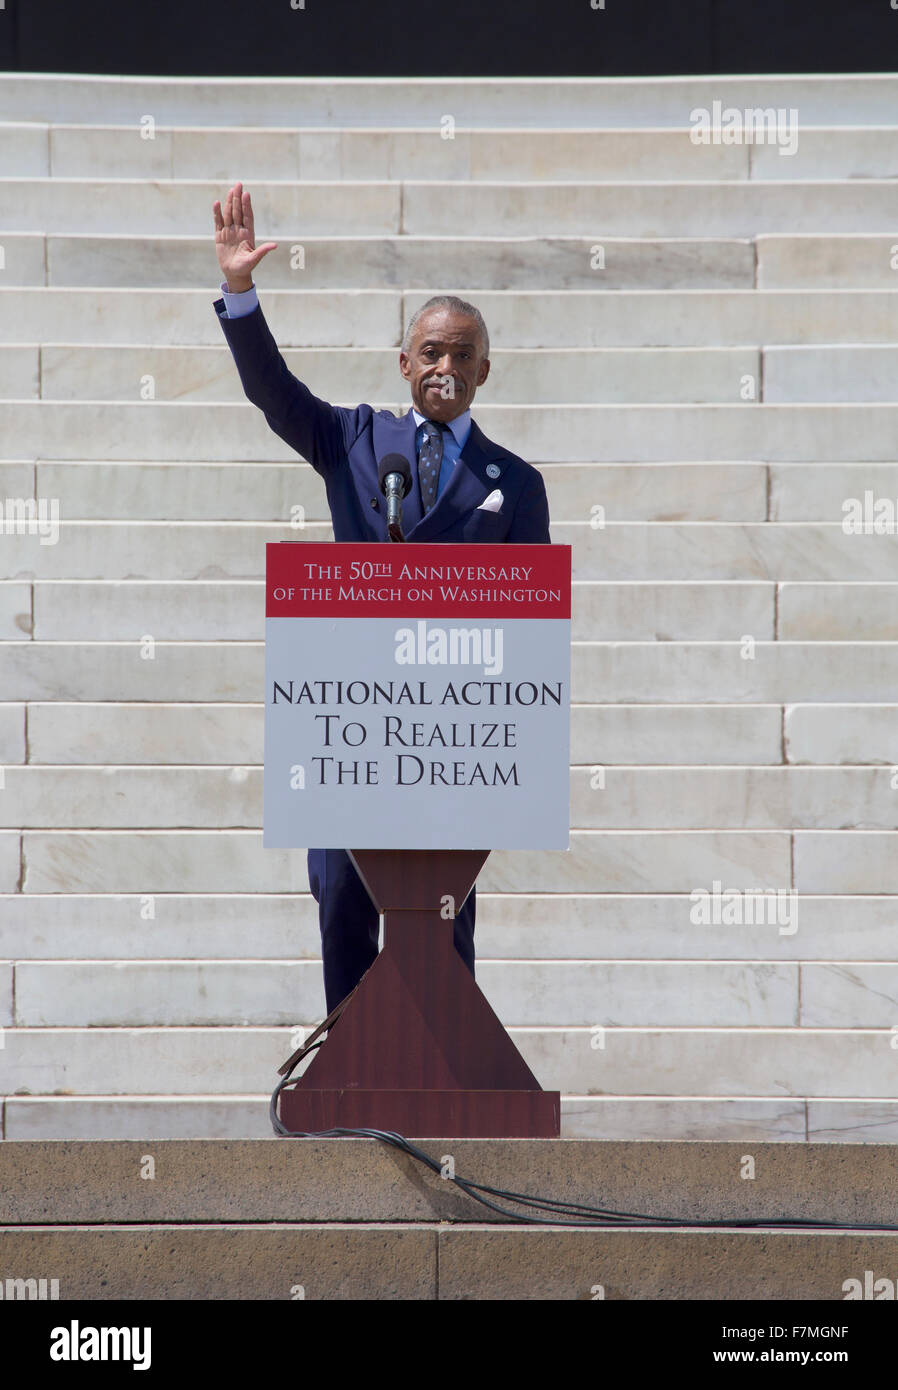 Reverend Al Sharpton, MSNBC TV host of 'Politics Nation,' speaks at the  National Action to Realize the Dream march and rally for the 50th Anniversary of the march on Washington and Martin Luther King's I Have A Dream Speech, August 24, 2013, Lincoln Memorial, Washington, D.C. Stock Photo